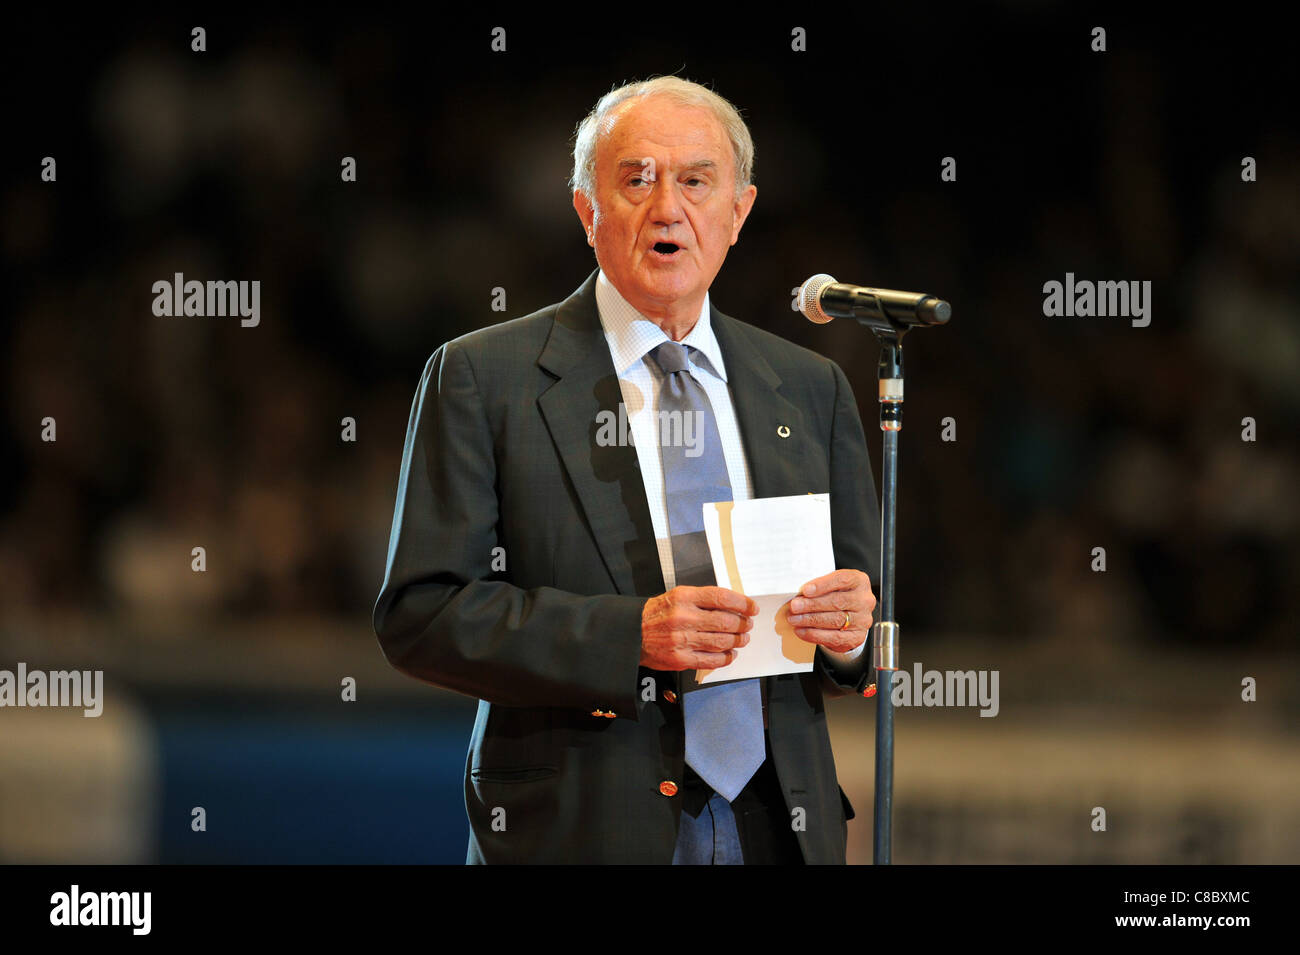 Prof.Bruno Grandi President of FIG gives a speech during the open ceremony of Artistic Gymnastics Championships Tokyo 2011. Stock Photo